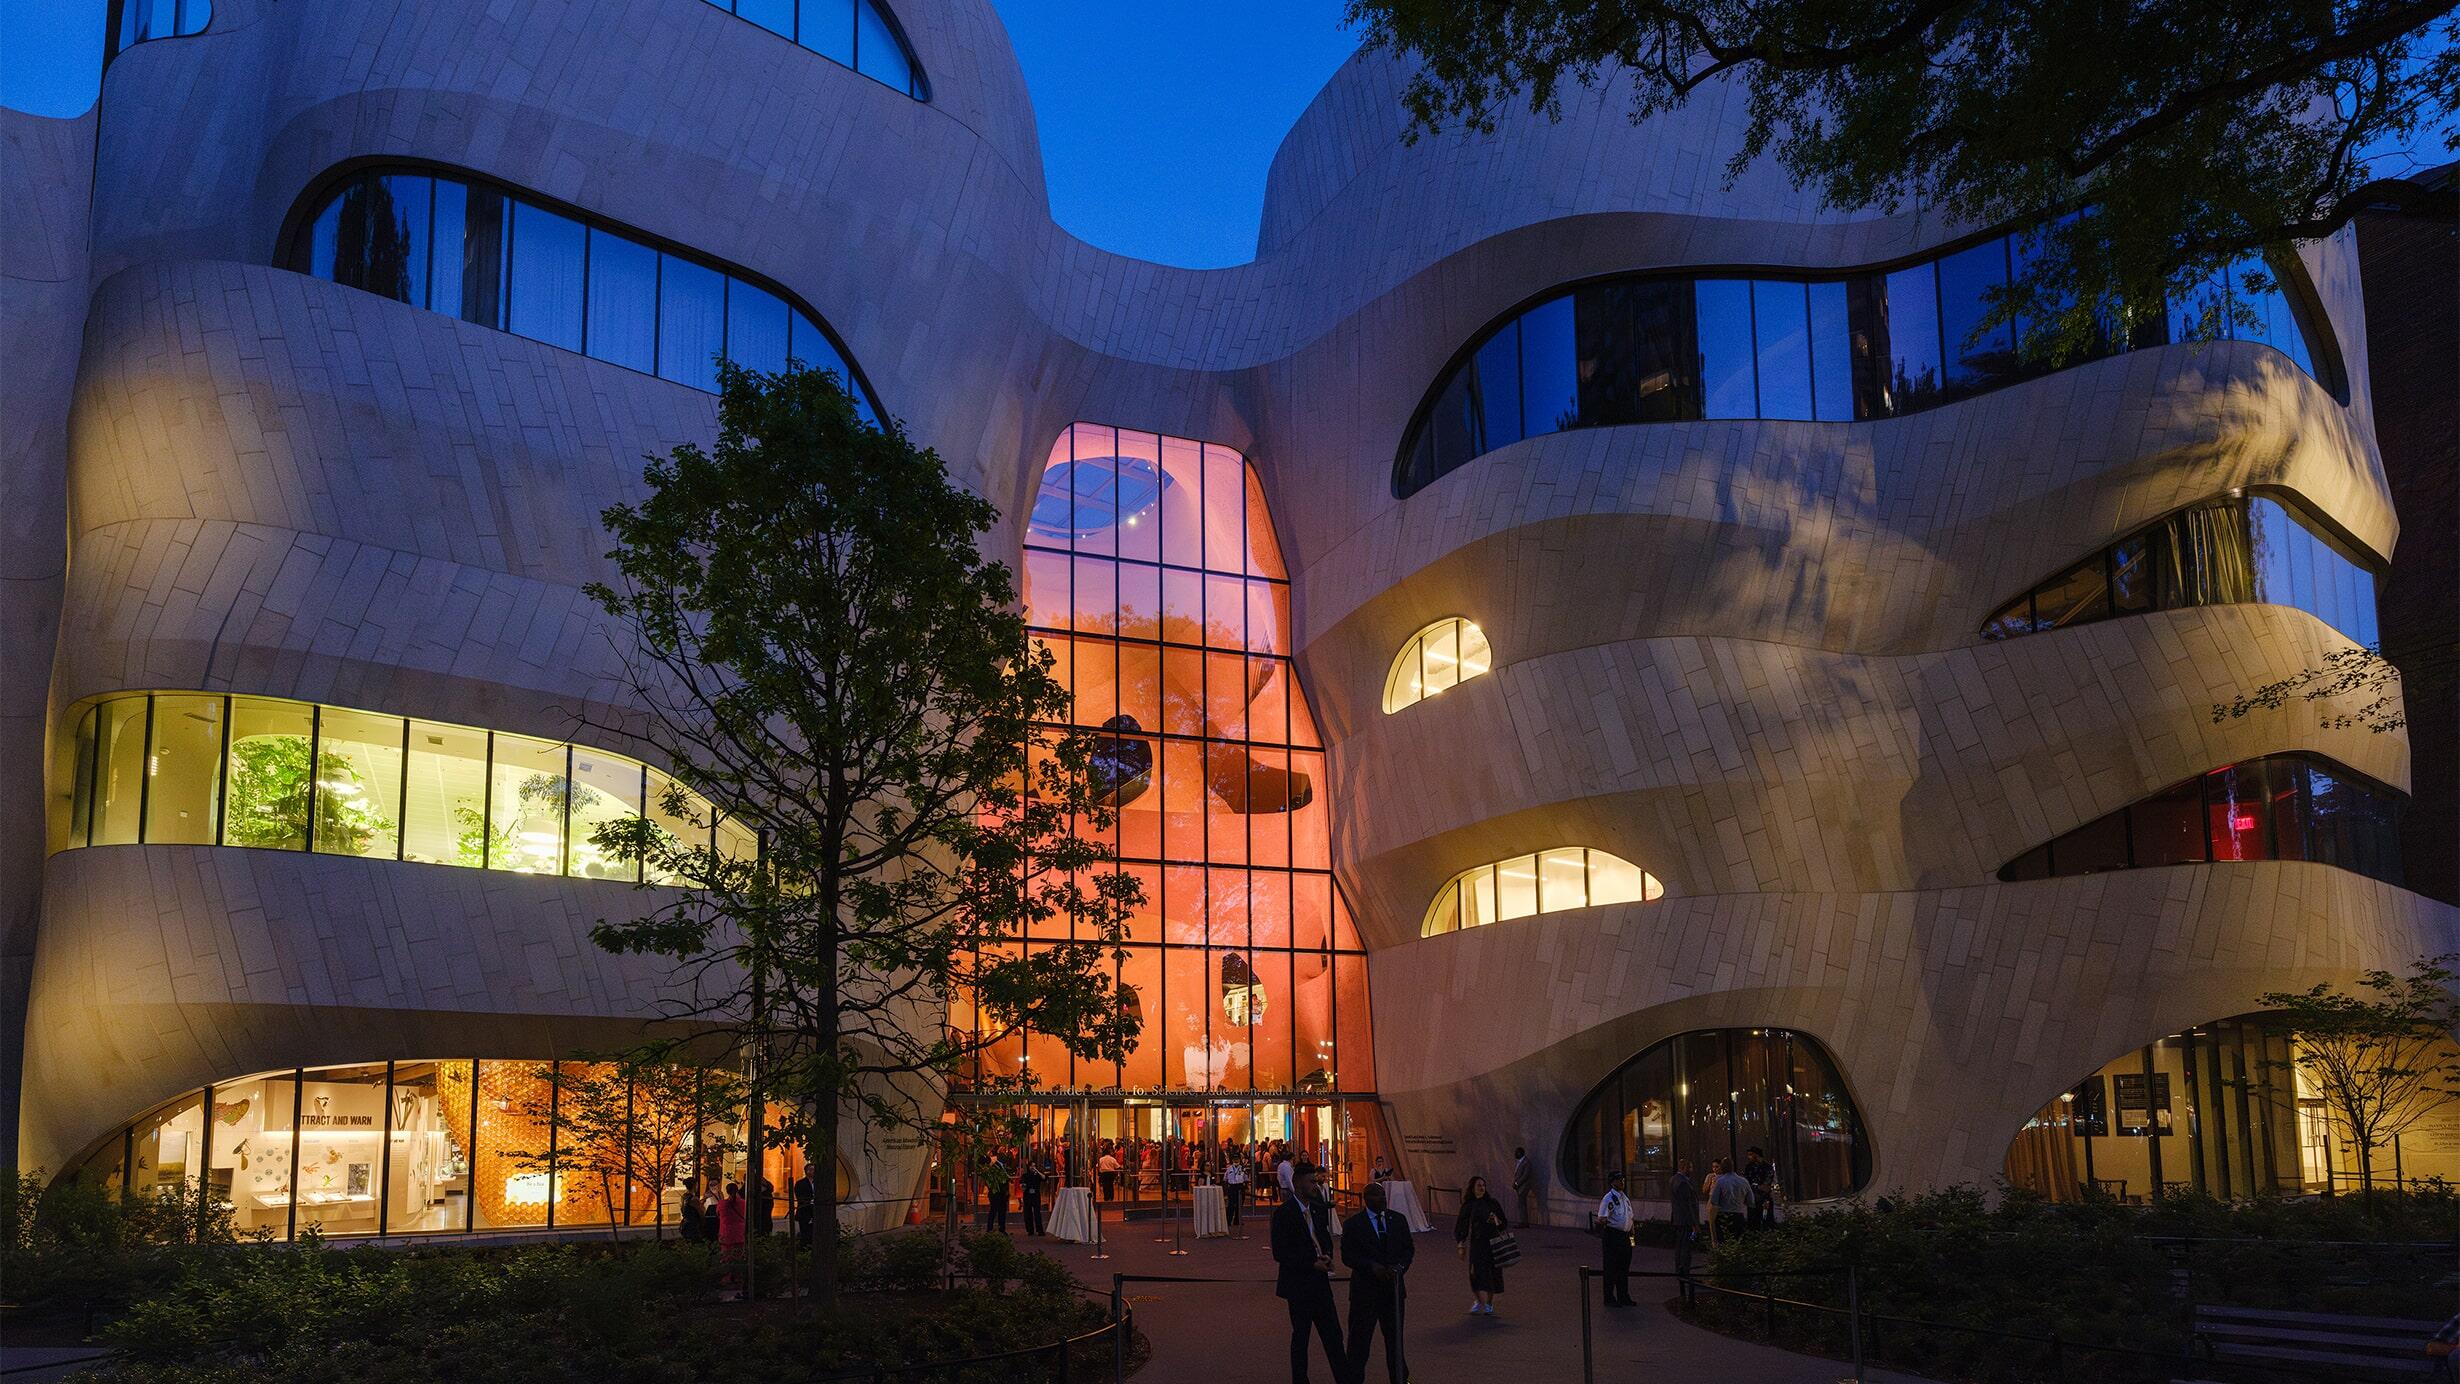 The Gilder Center at the American Museum of Natural History, seen at night. Bright lights emanate from within the curved exterior of the building.